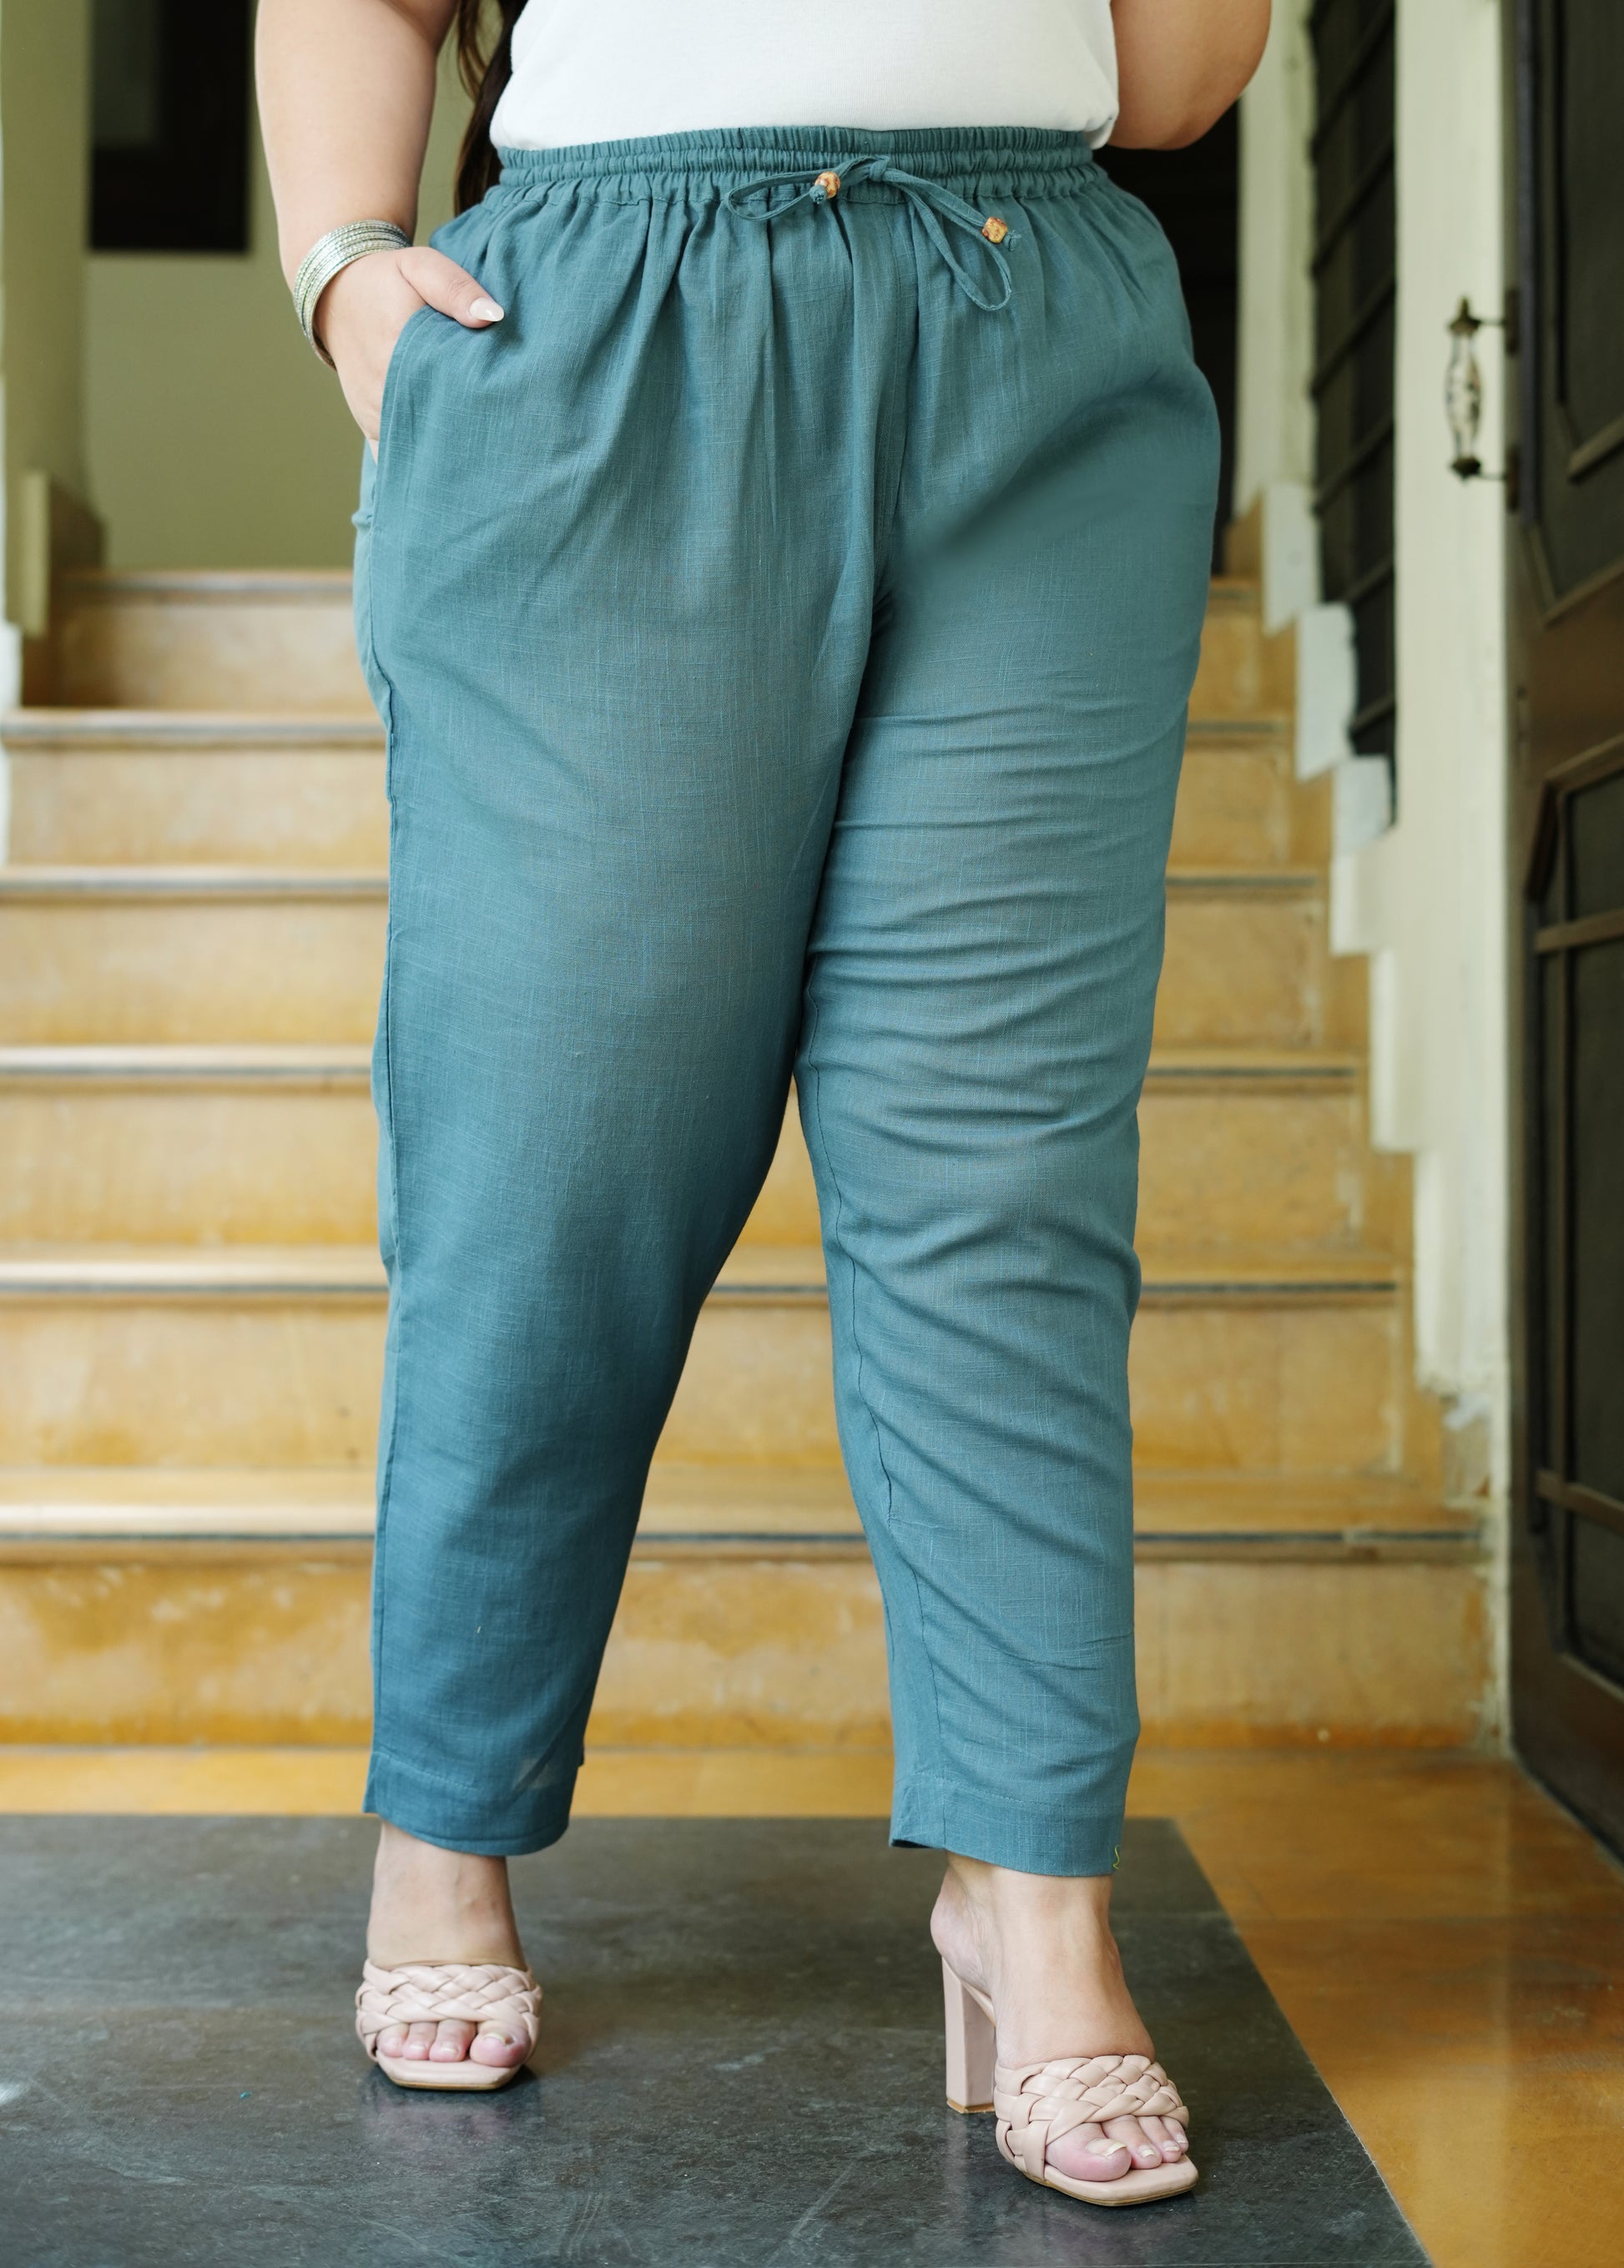 CottonPolyester Plus Size Womens Pants or Trousers